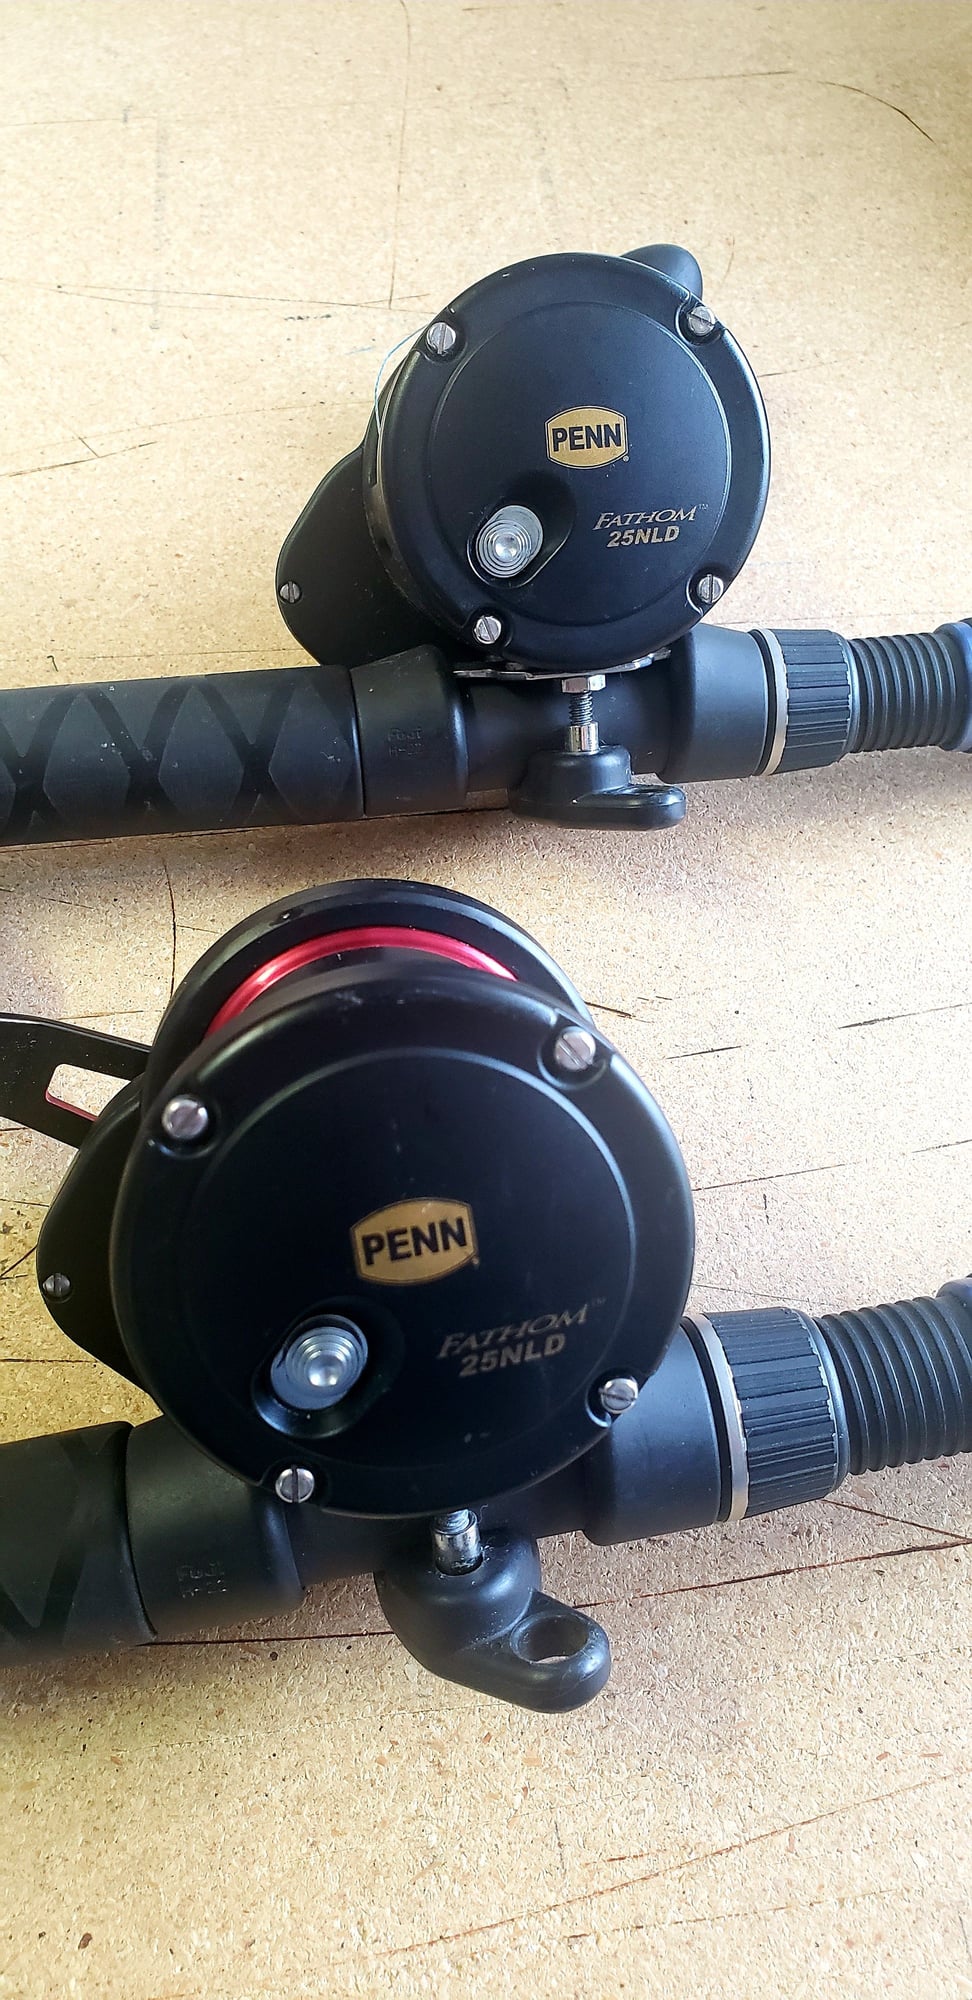 SOLD! Penn Fathom 25NLD - Tsunami Airwave Combos (2) - SOLD - The Hull  Truth - Boating and Fishing Forum